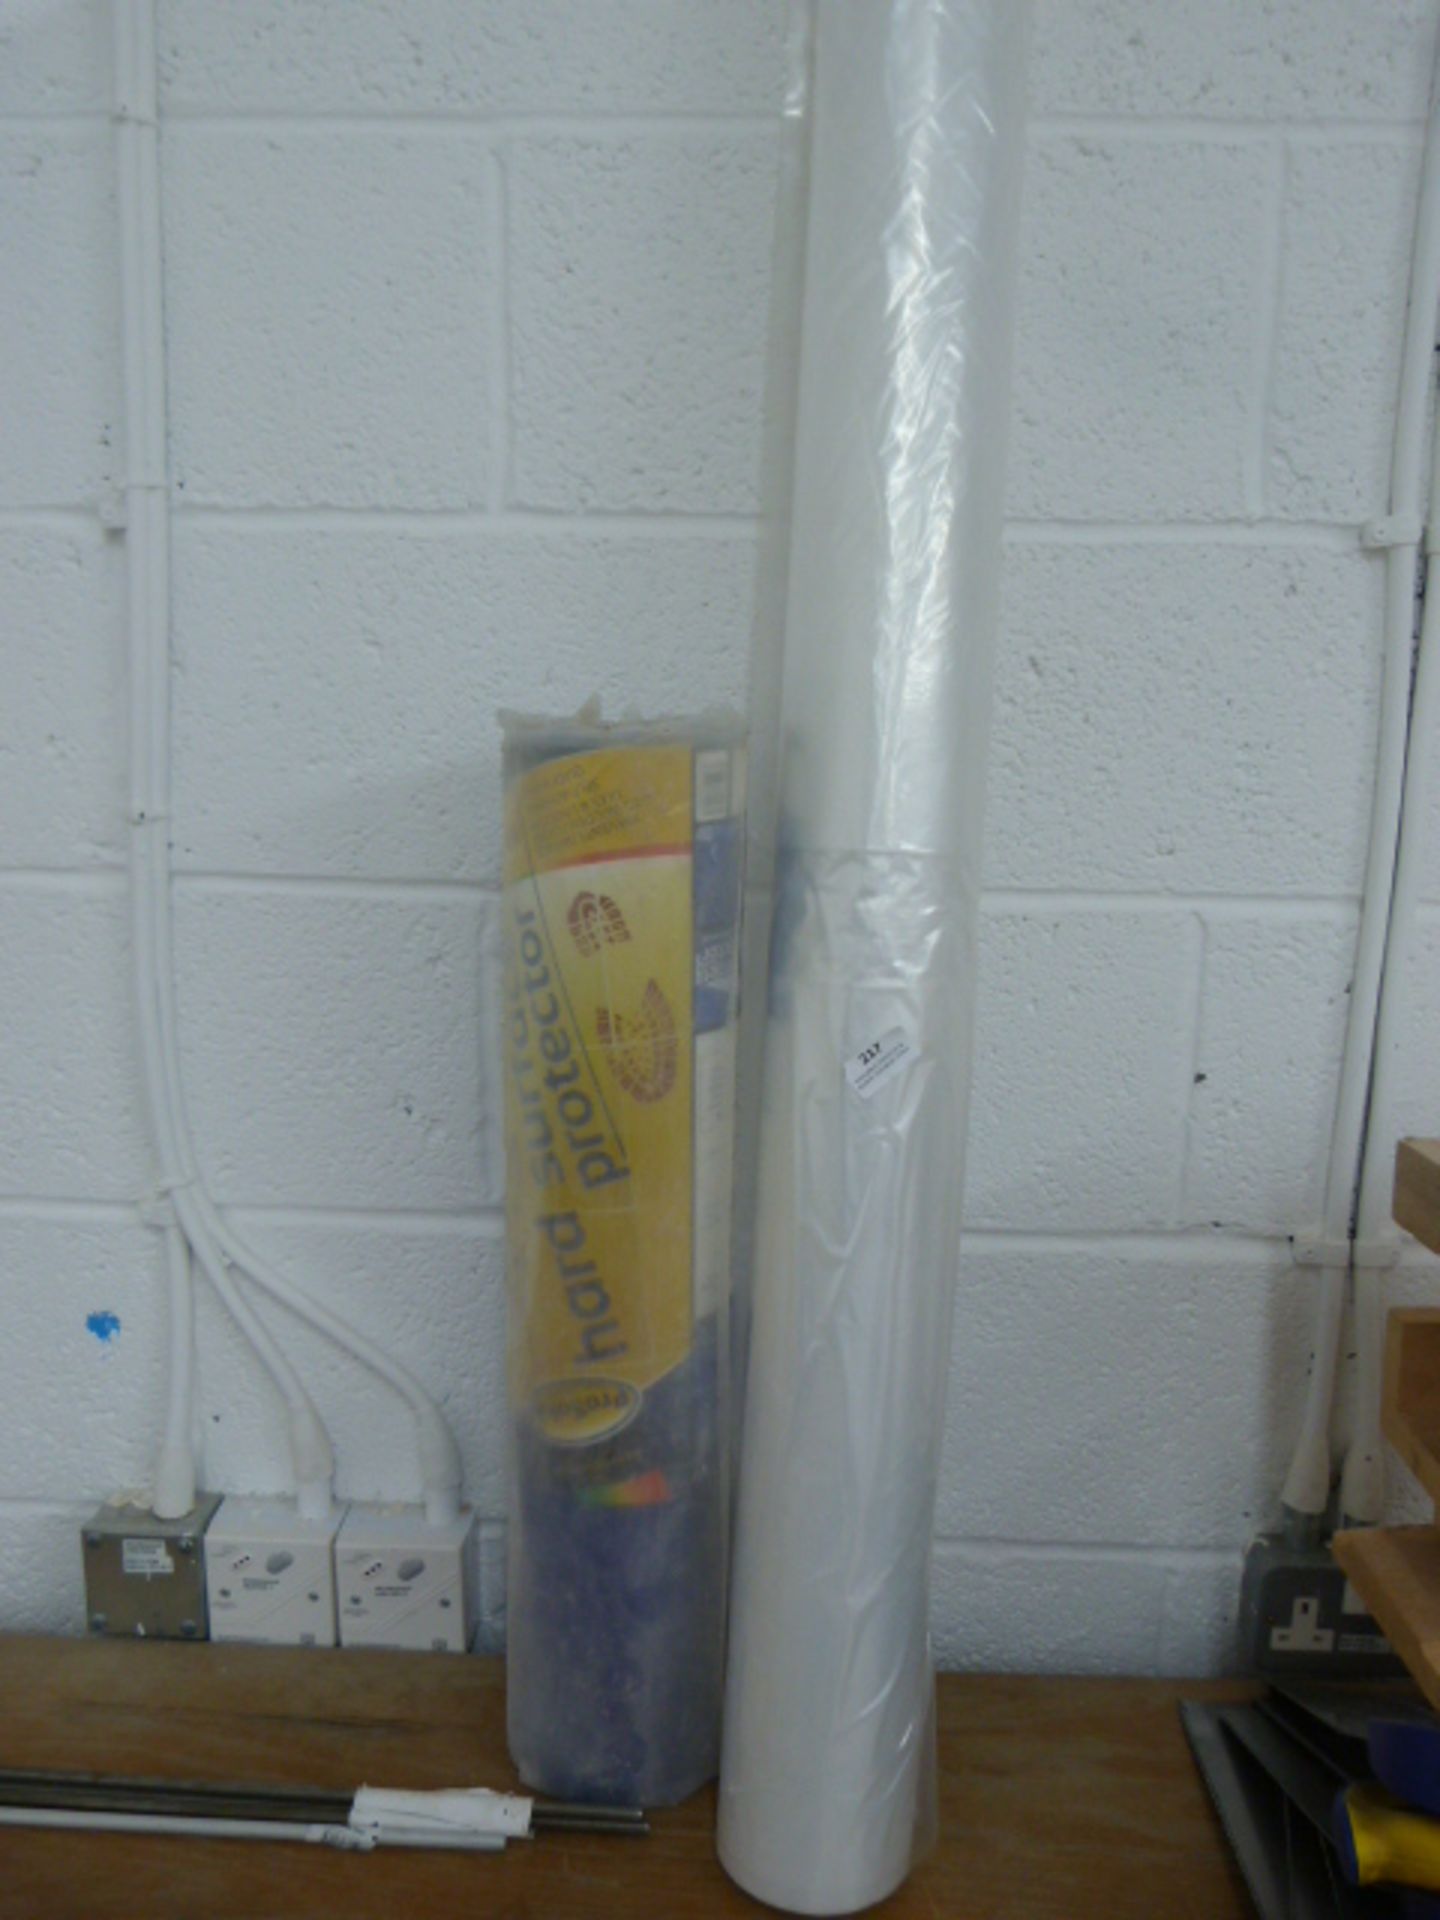 *Two Rolls of Protective Plastic Film